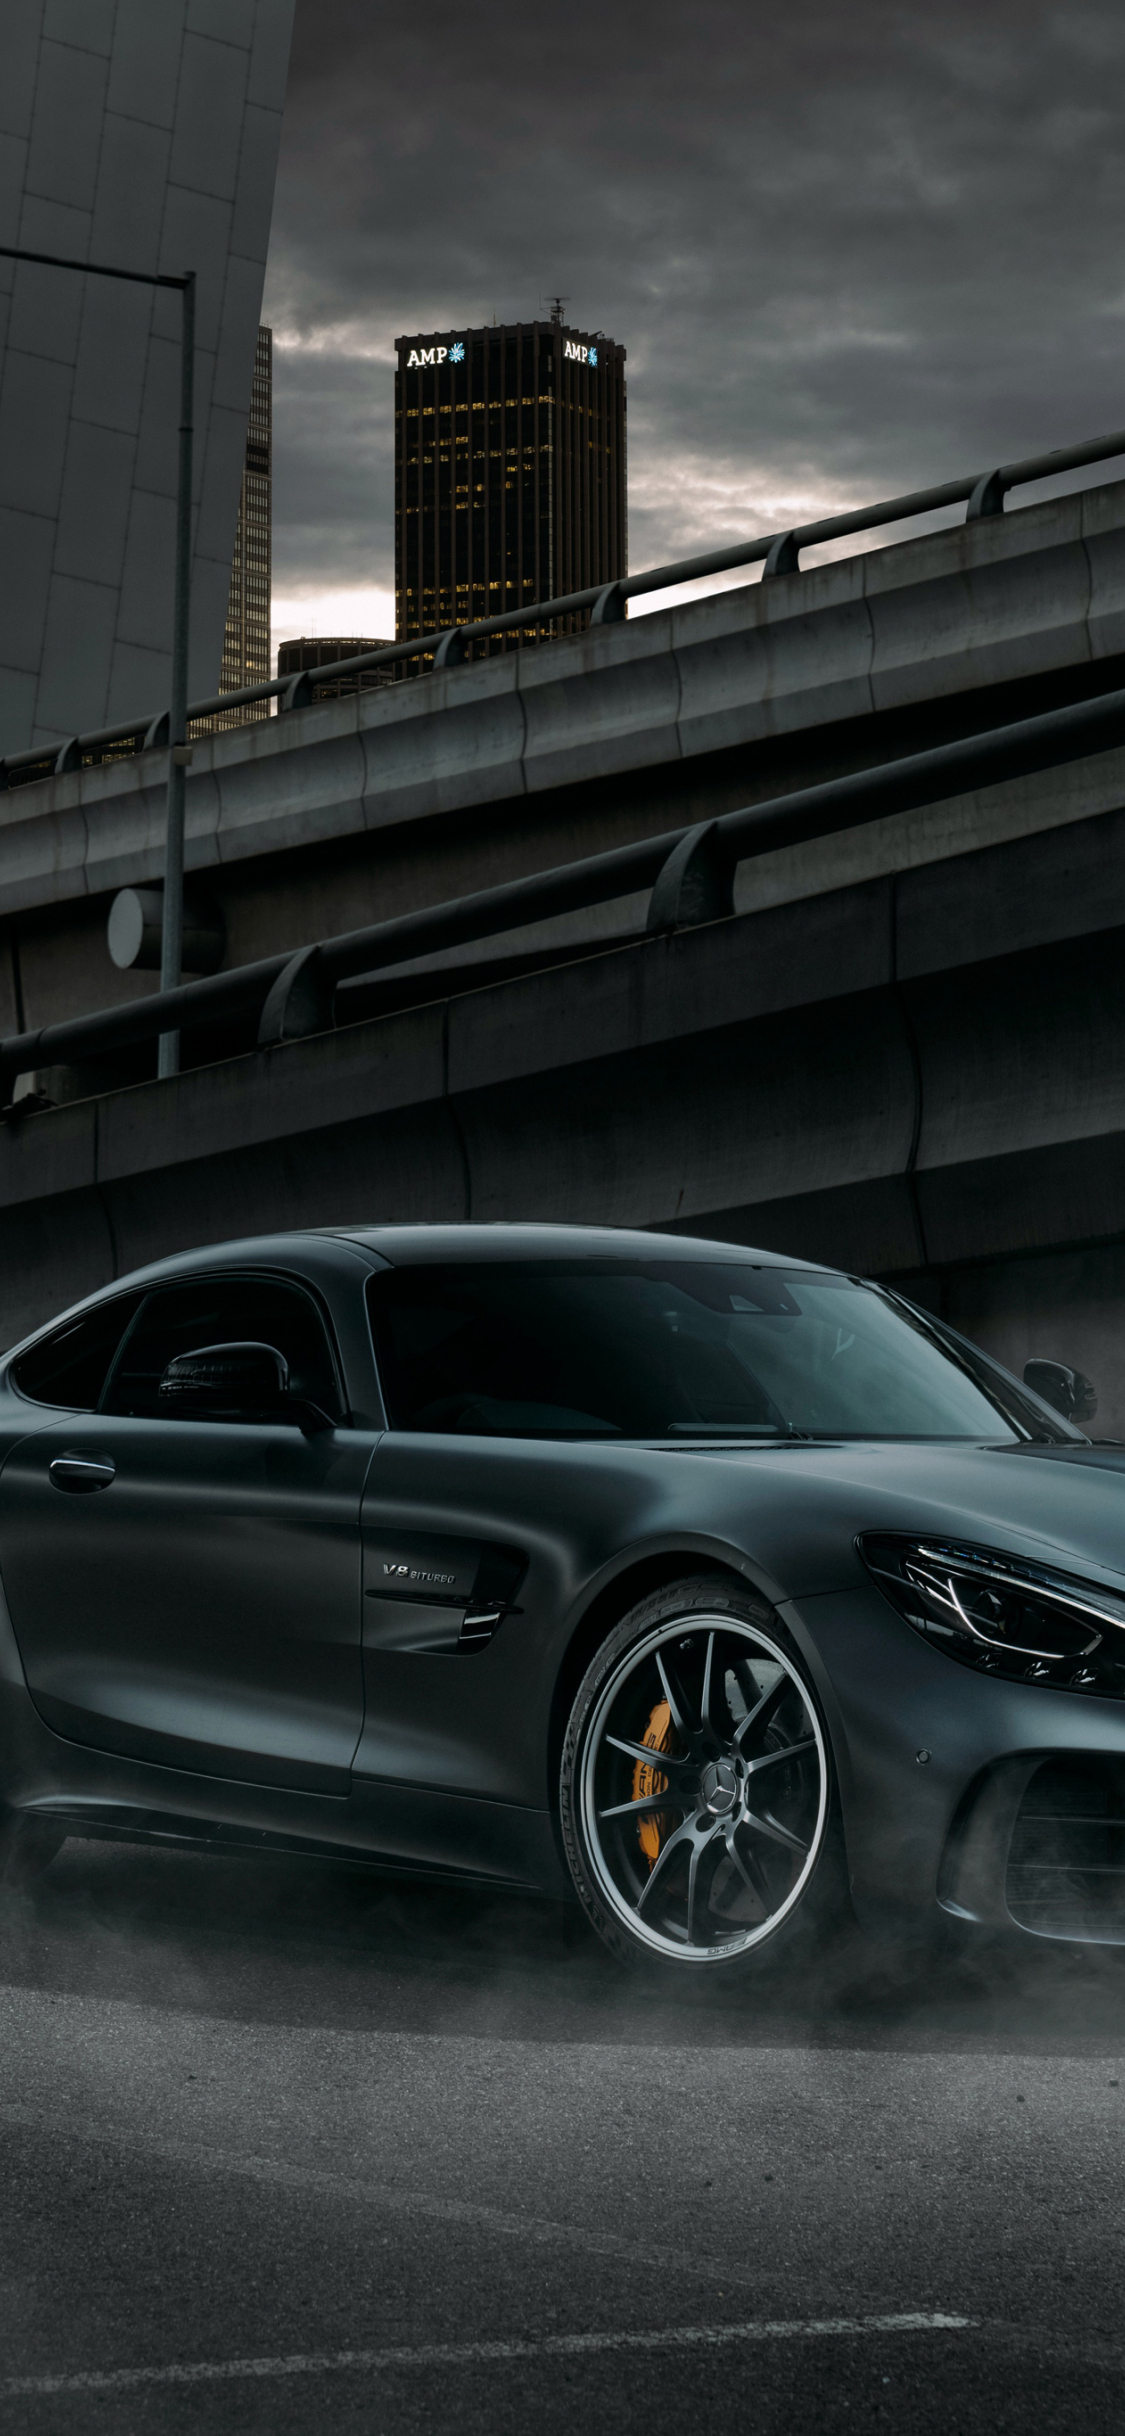 Download Mercedes Amg Gt, Luxury Car 1125x2436 Wallpaper, Iphone X, 1125x2436 HD Image, Background, 7534